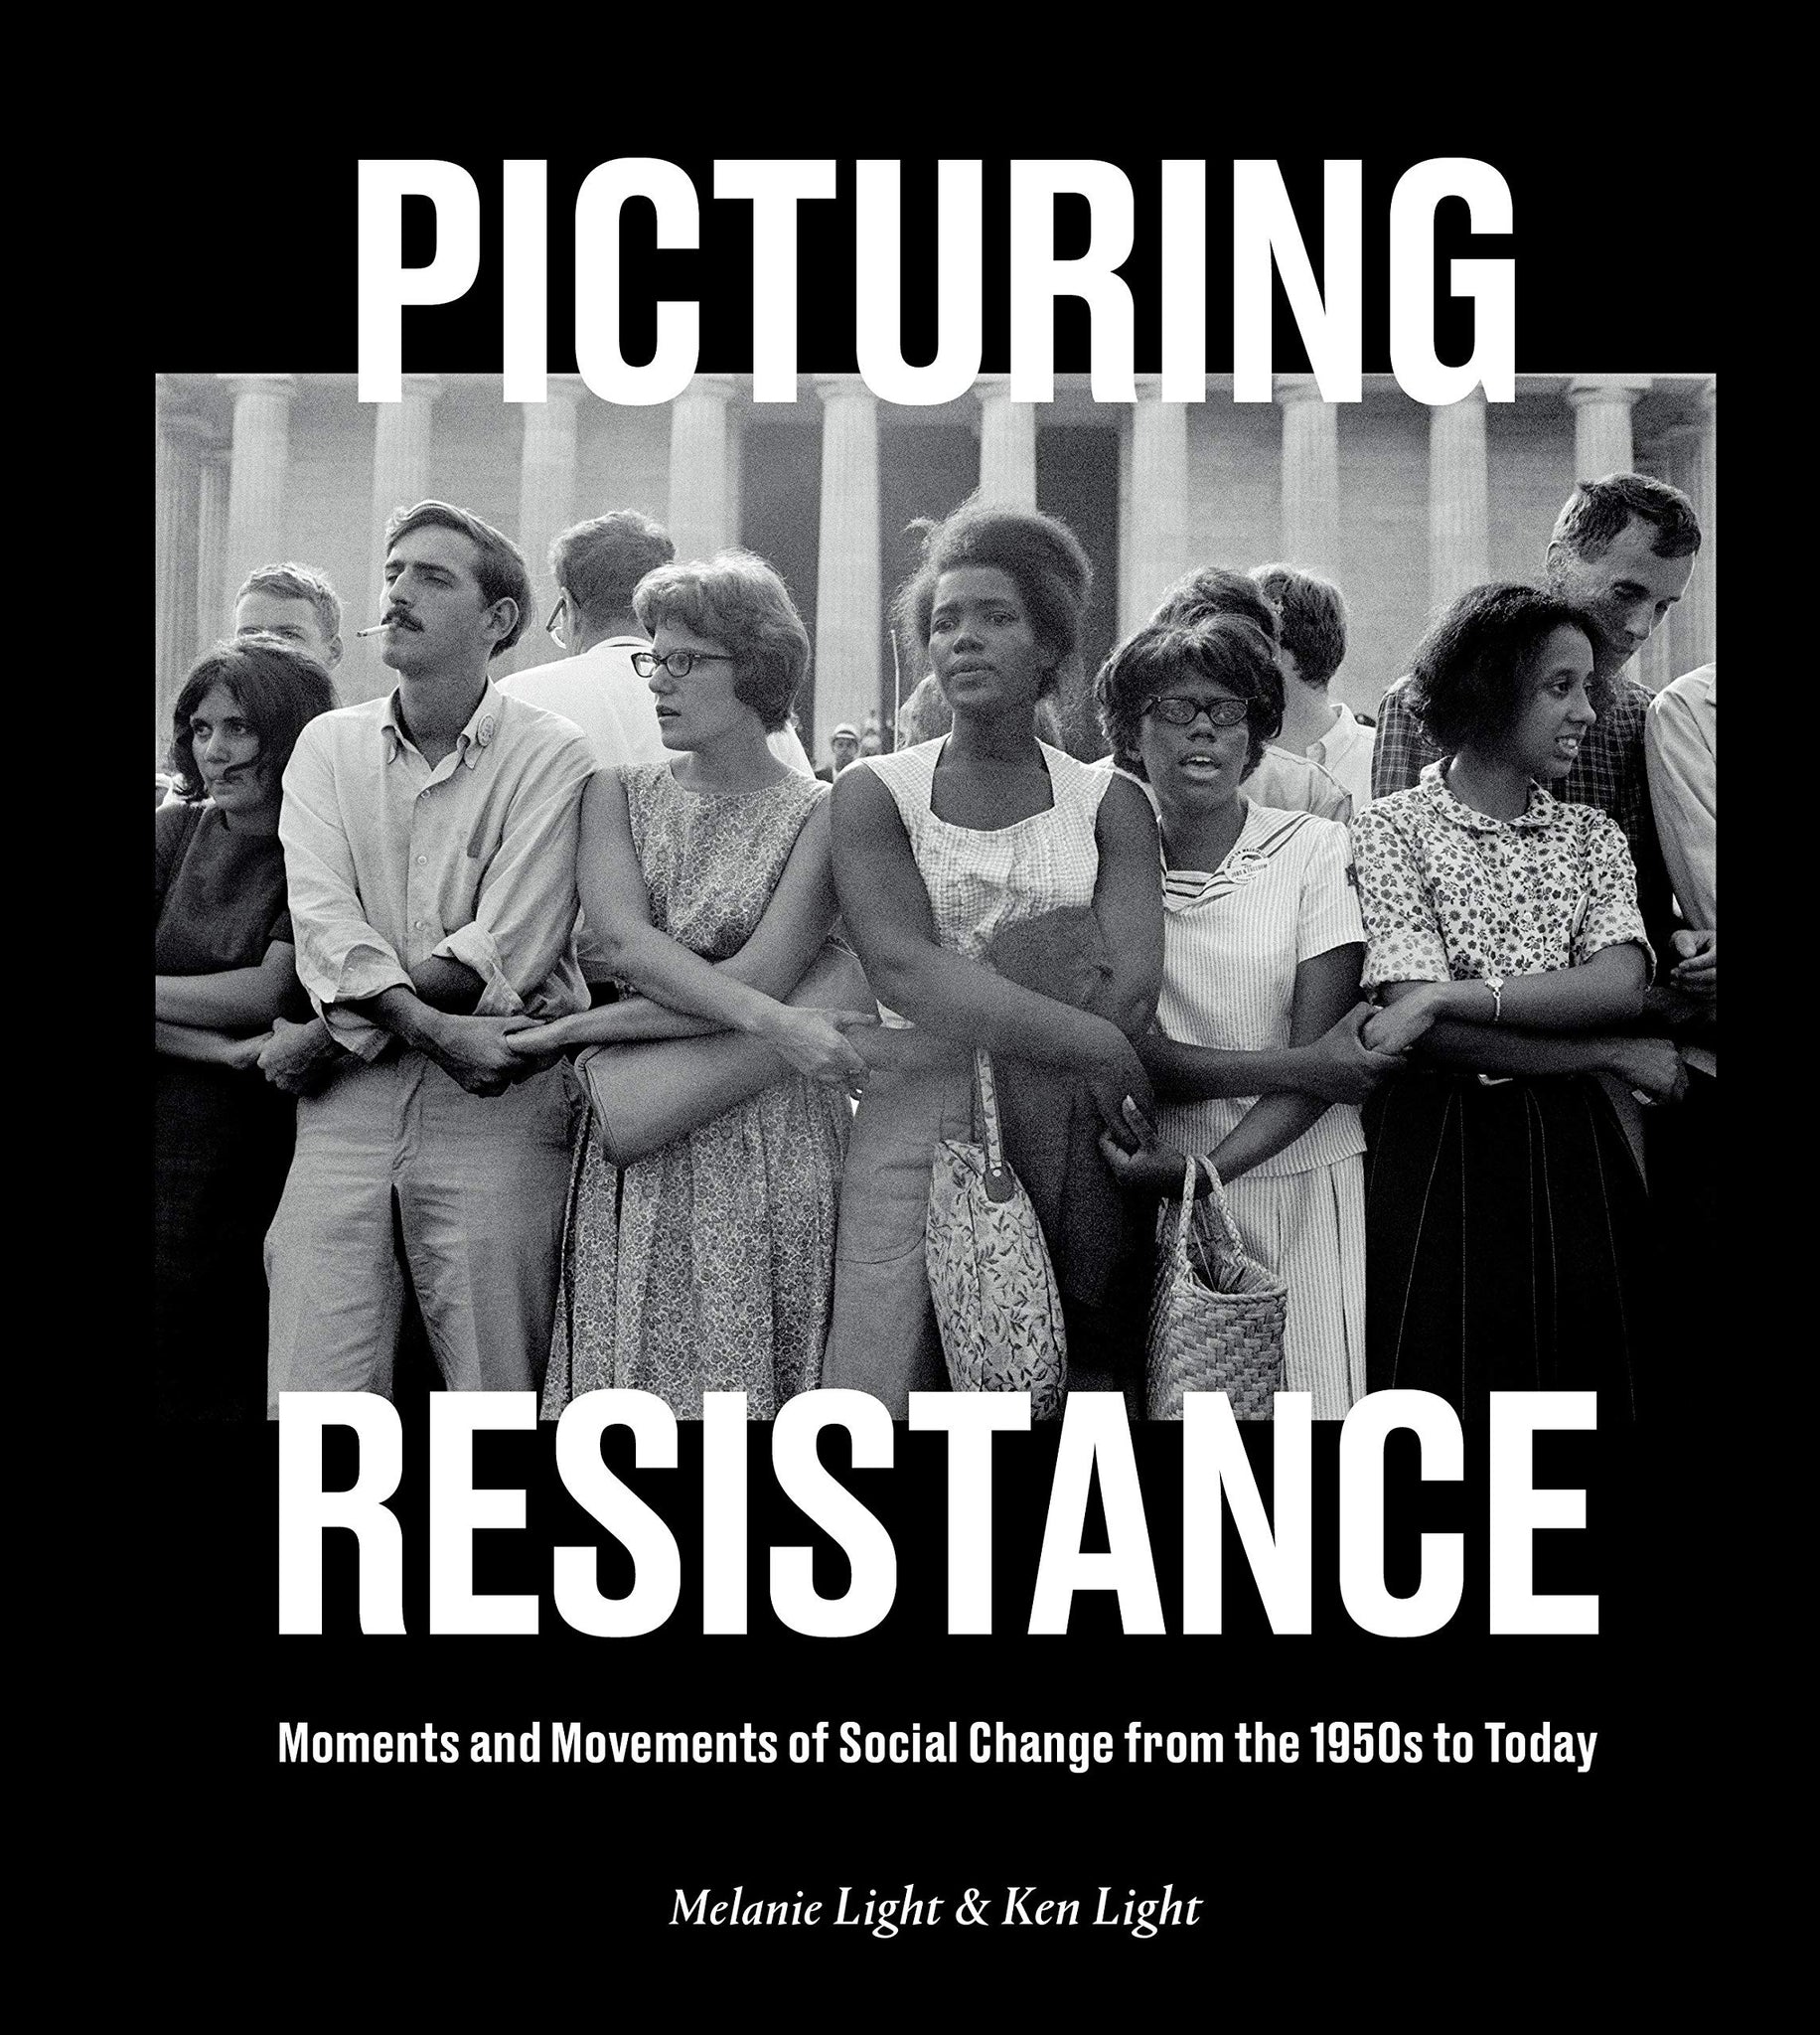 Picturing Resistance: Moments and Movements of Social Change from the 1950s to Today (Hardcover)